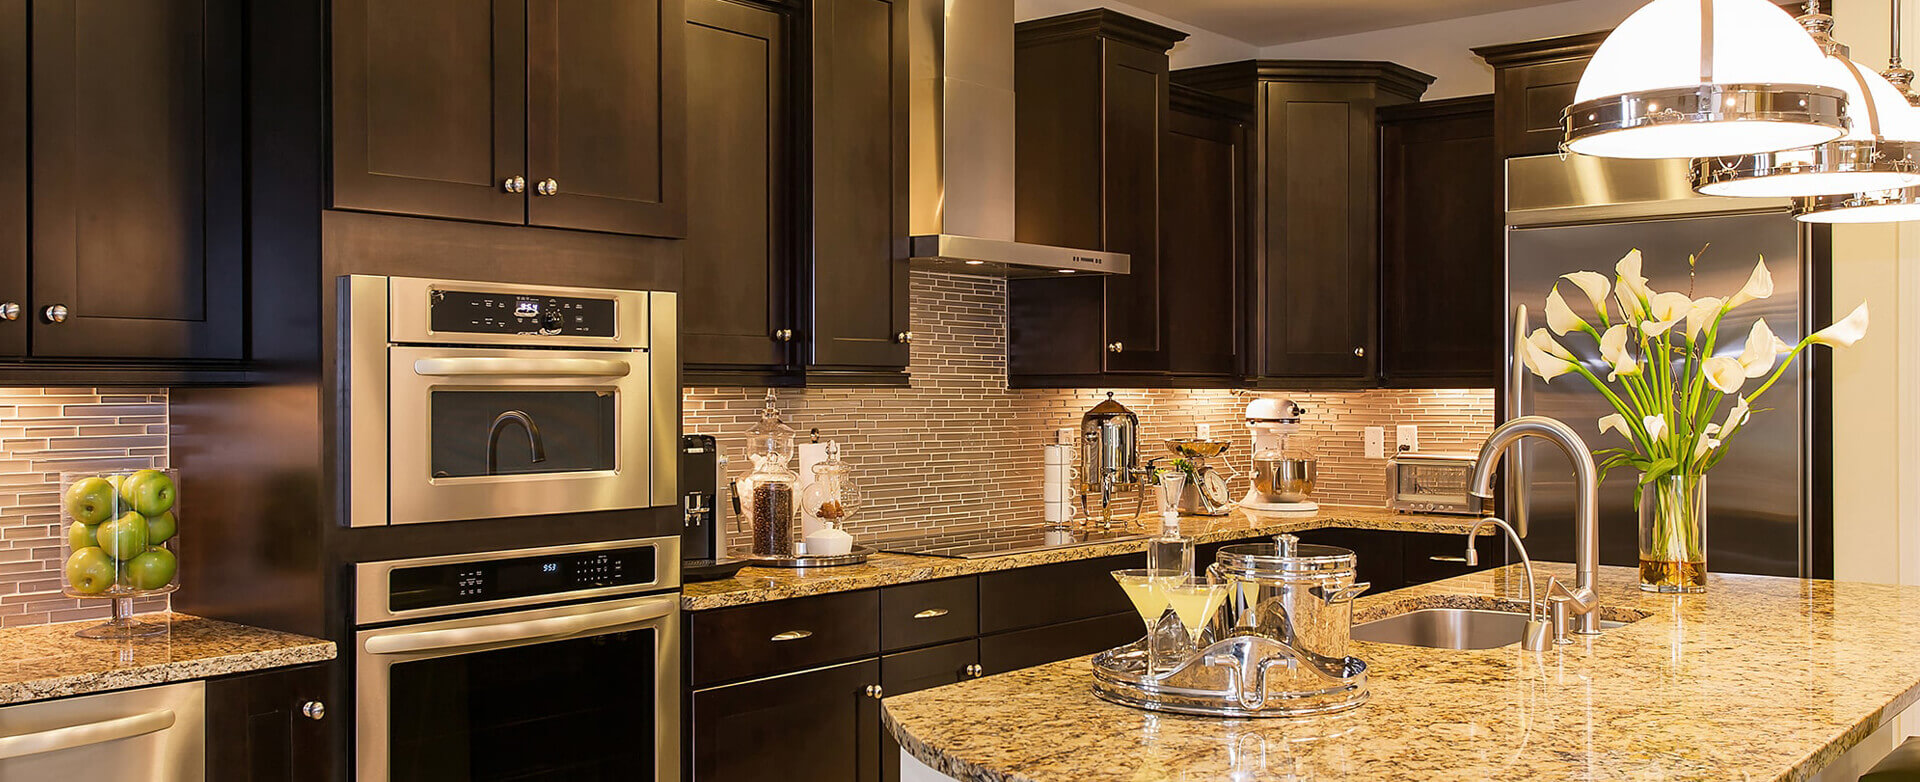 Kitchen Renovation Contractors Serving In Mississauga Vaughan Markham